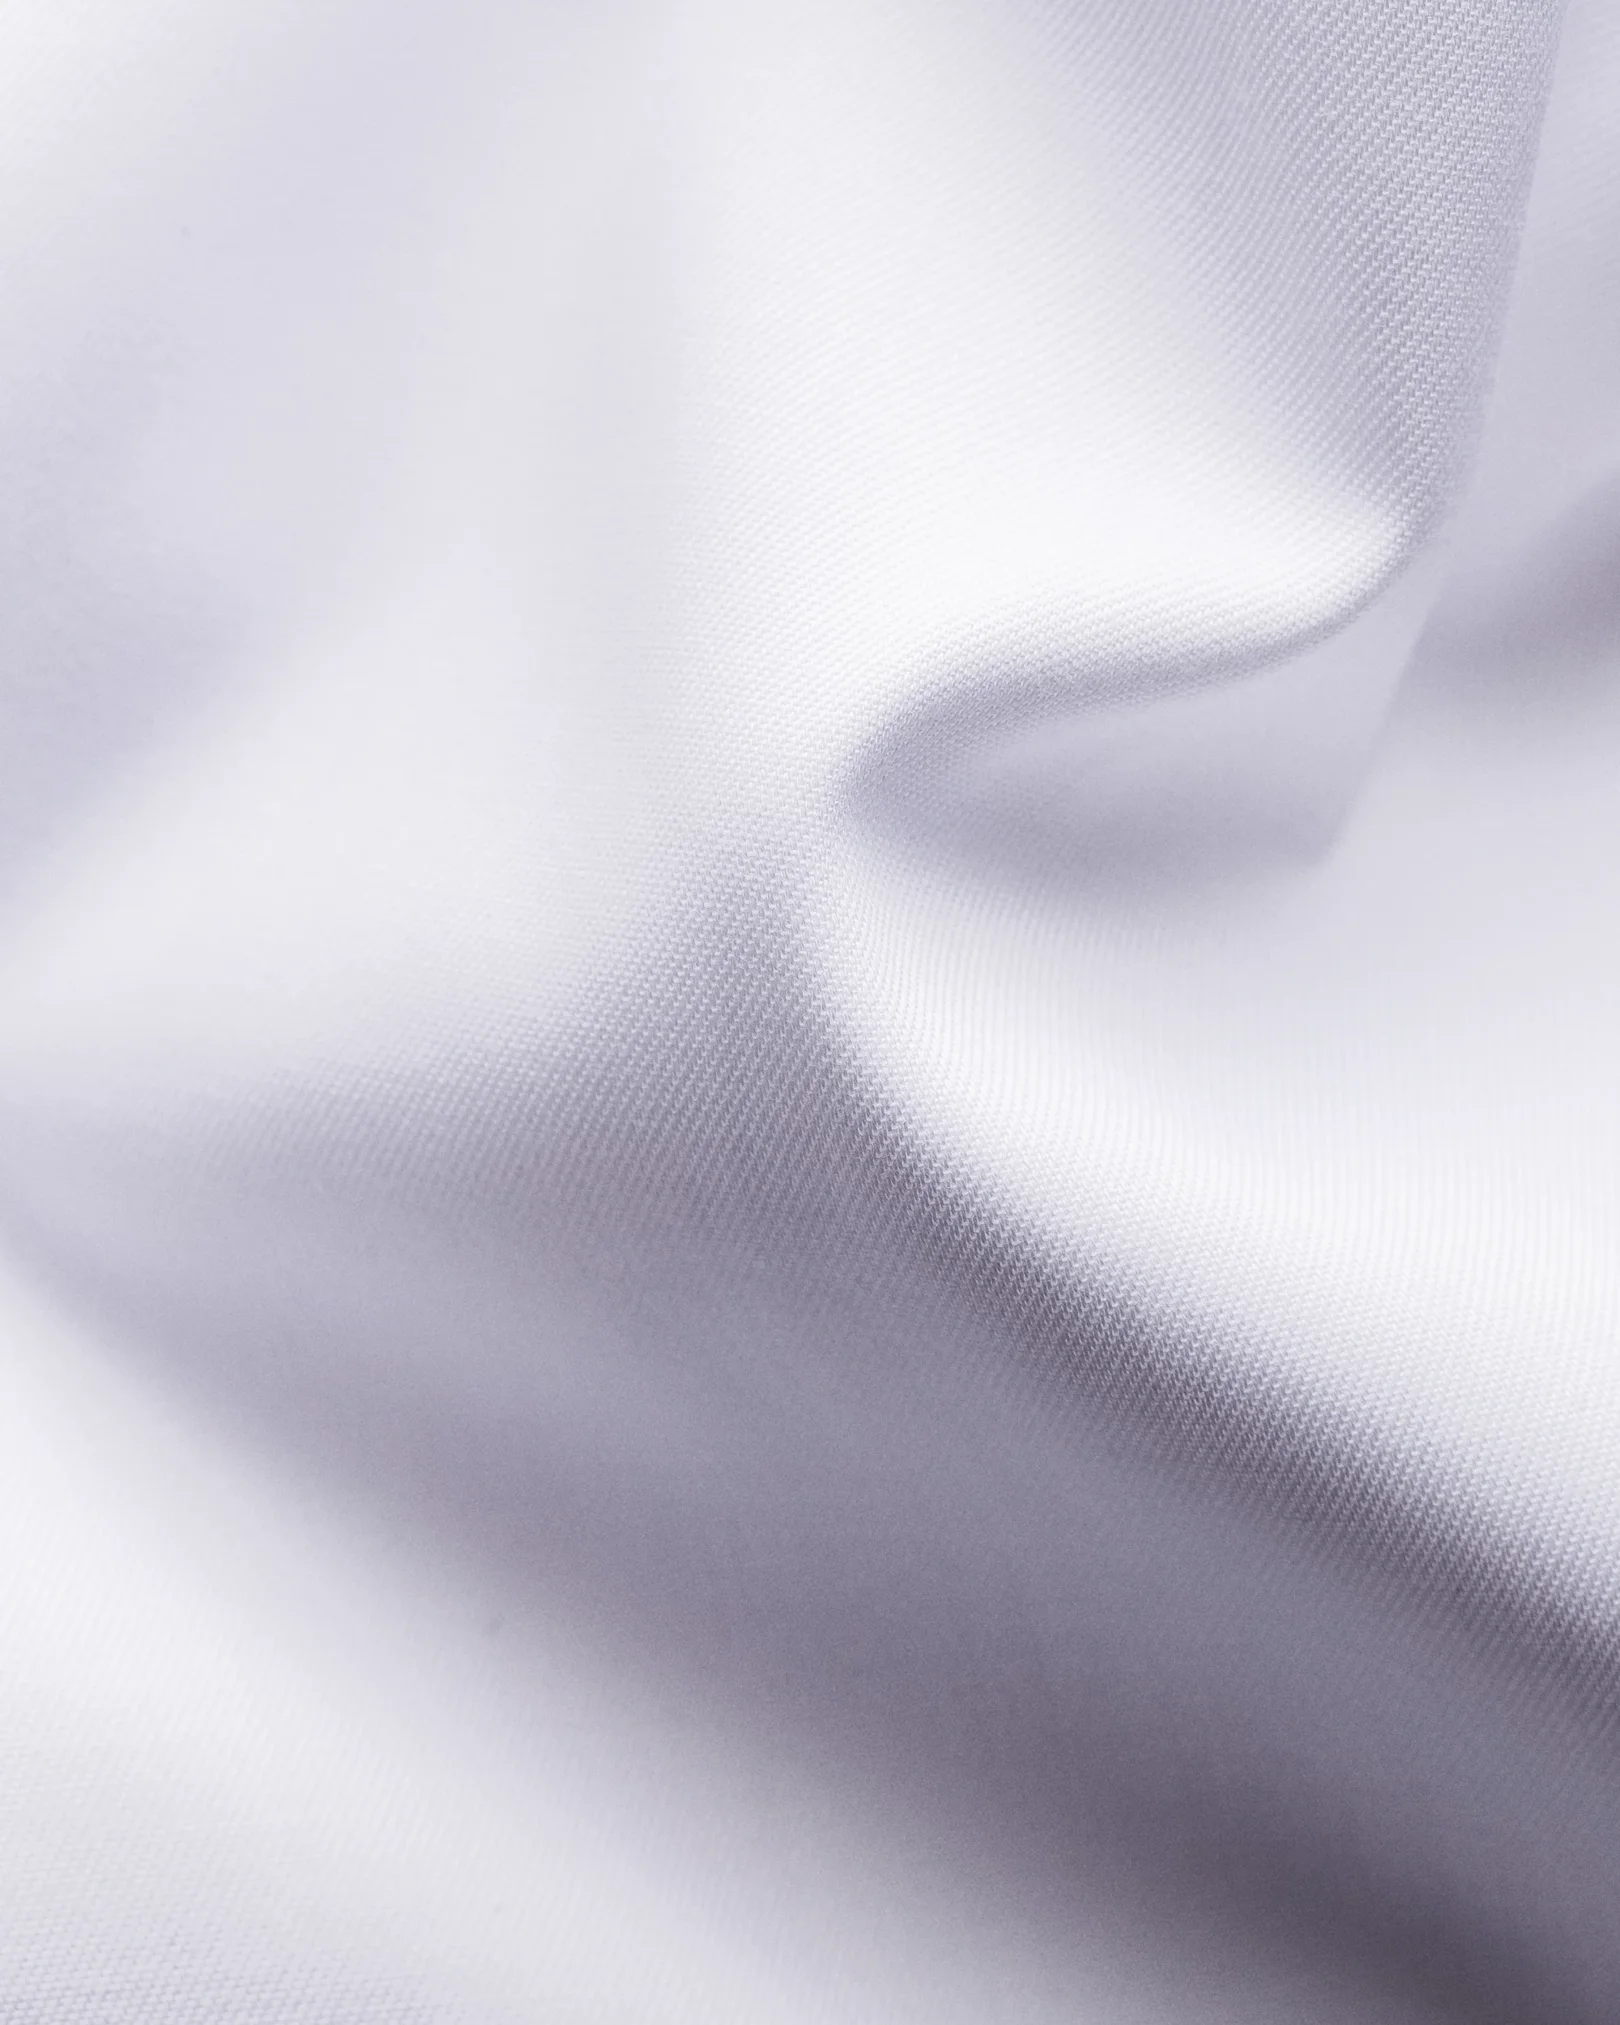 Eton - white signature twill with special details